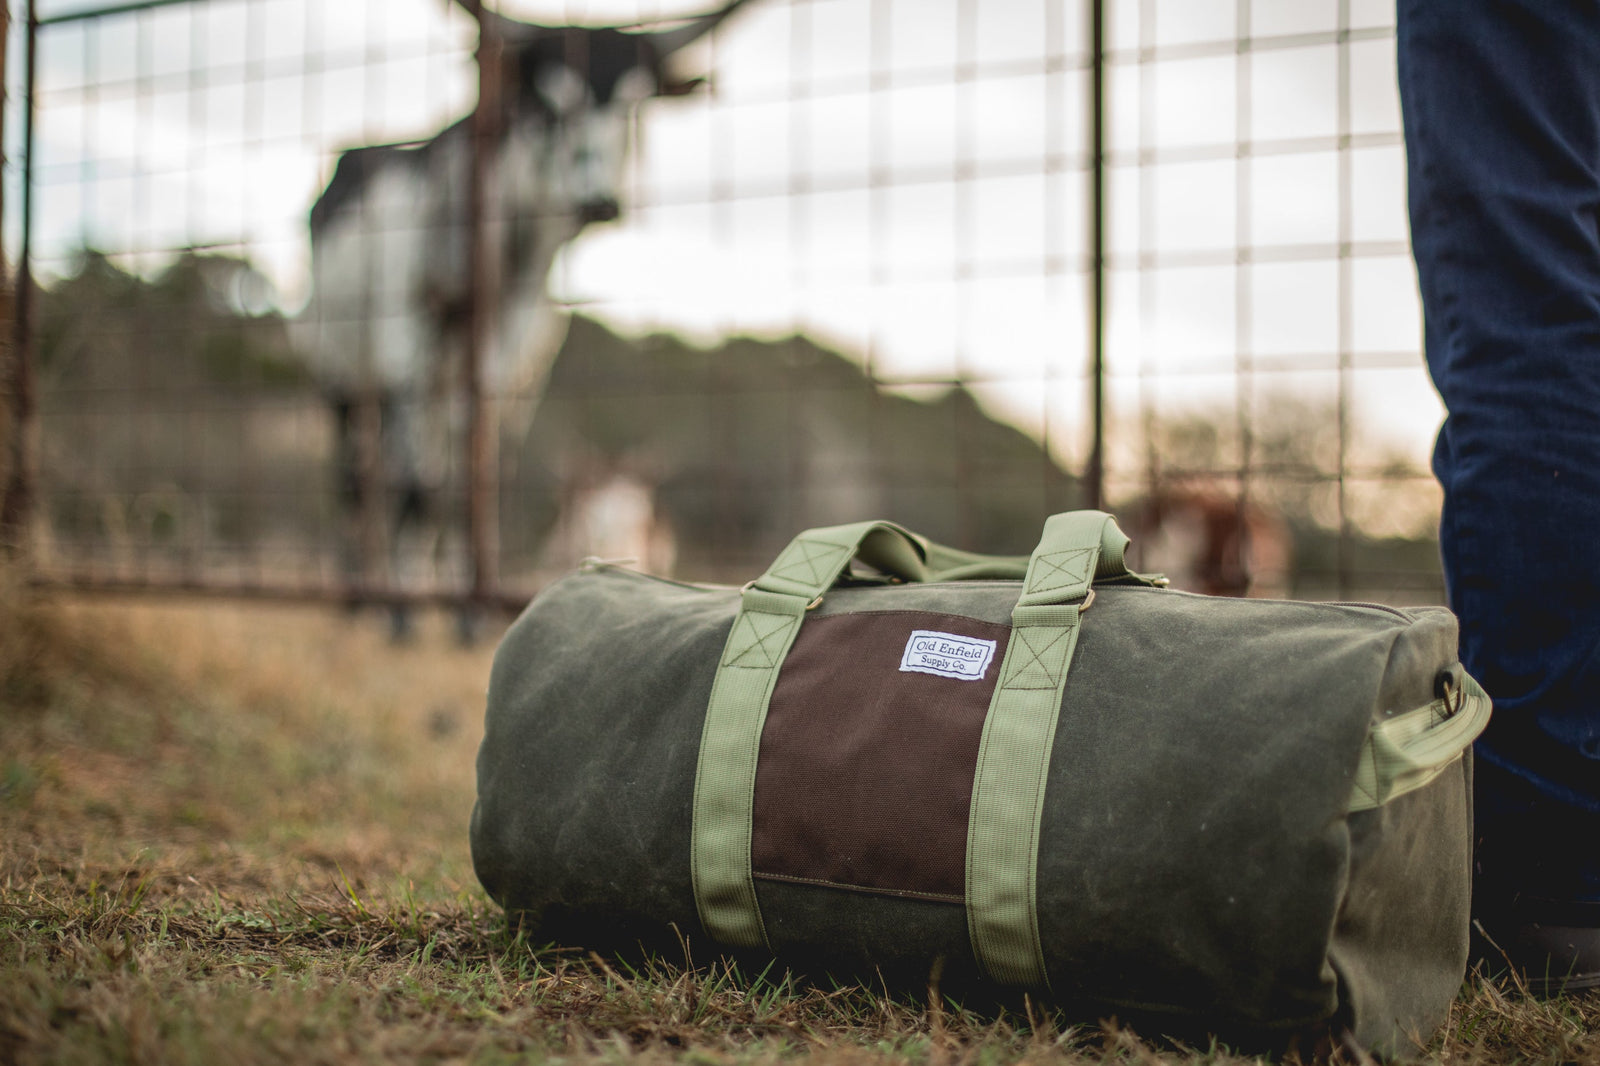 Filsons Ballistic Nylon Duffle Pack Really Is the Greatest Bag Ever Made   WIRED